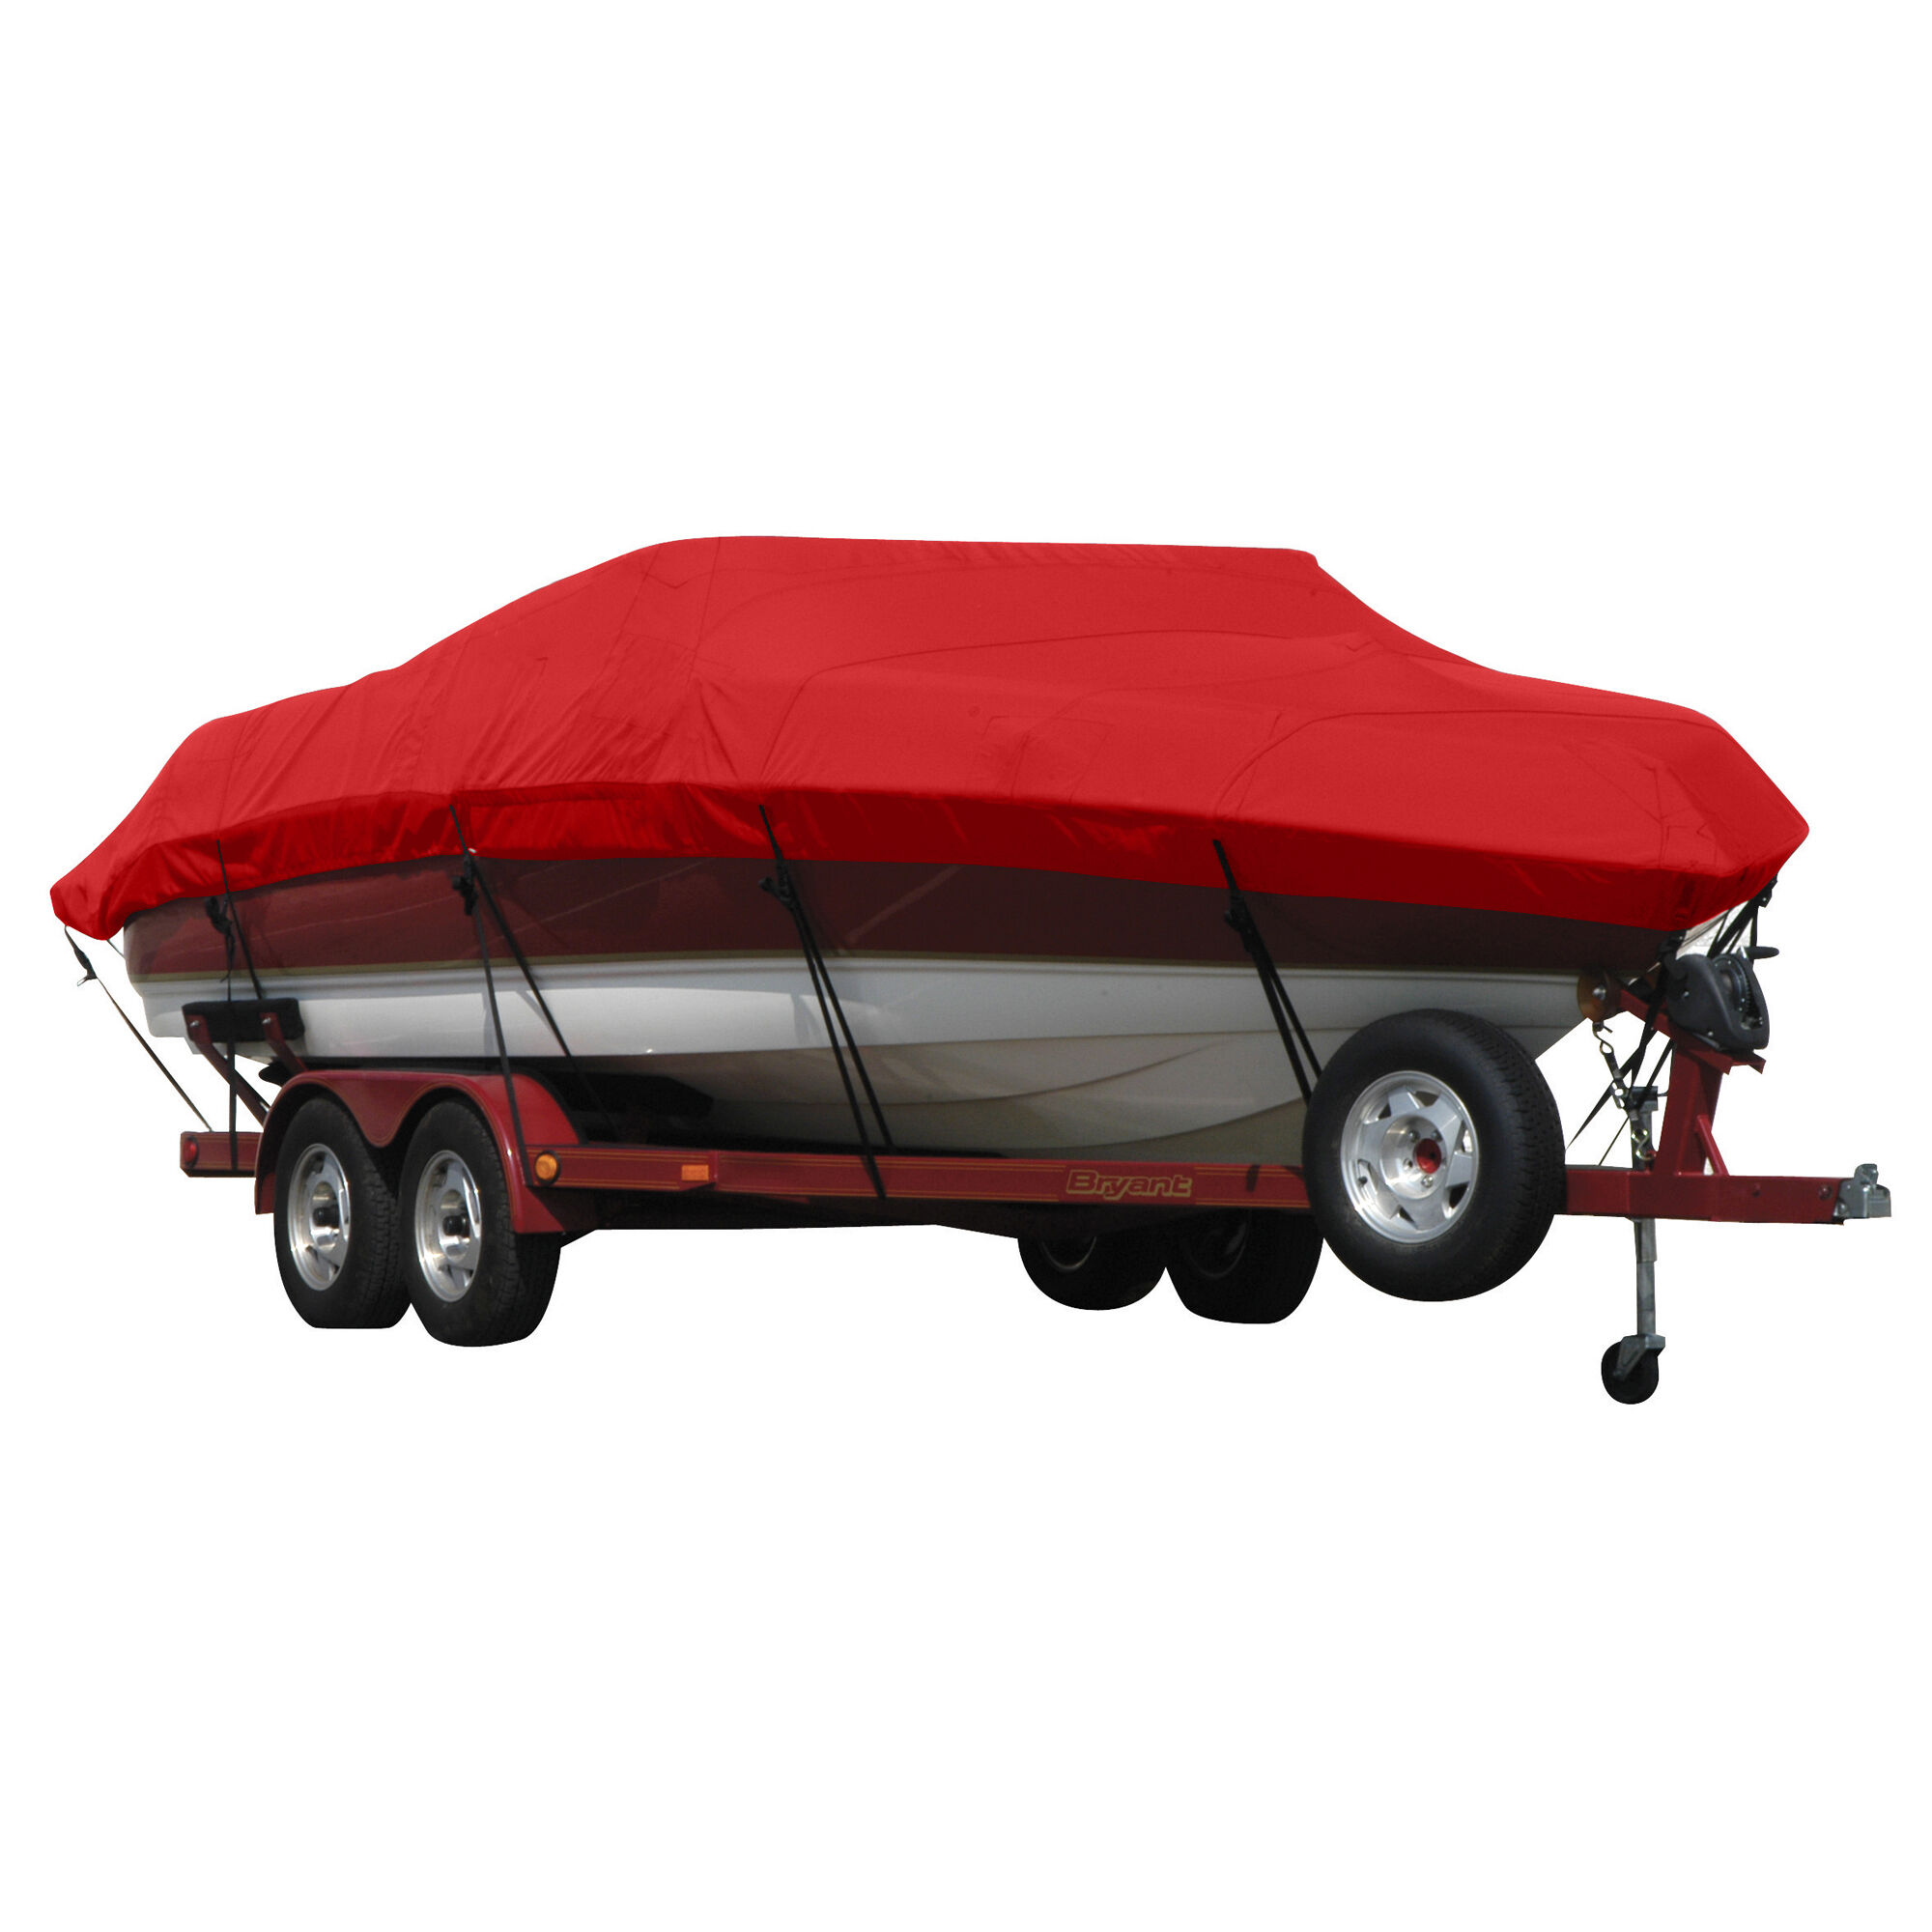 Covermate Exact Fit Sunbrella Boat Cover for Campion Chase 800 Chase 800 I/O. Jockey Red Acrylic